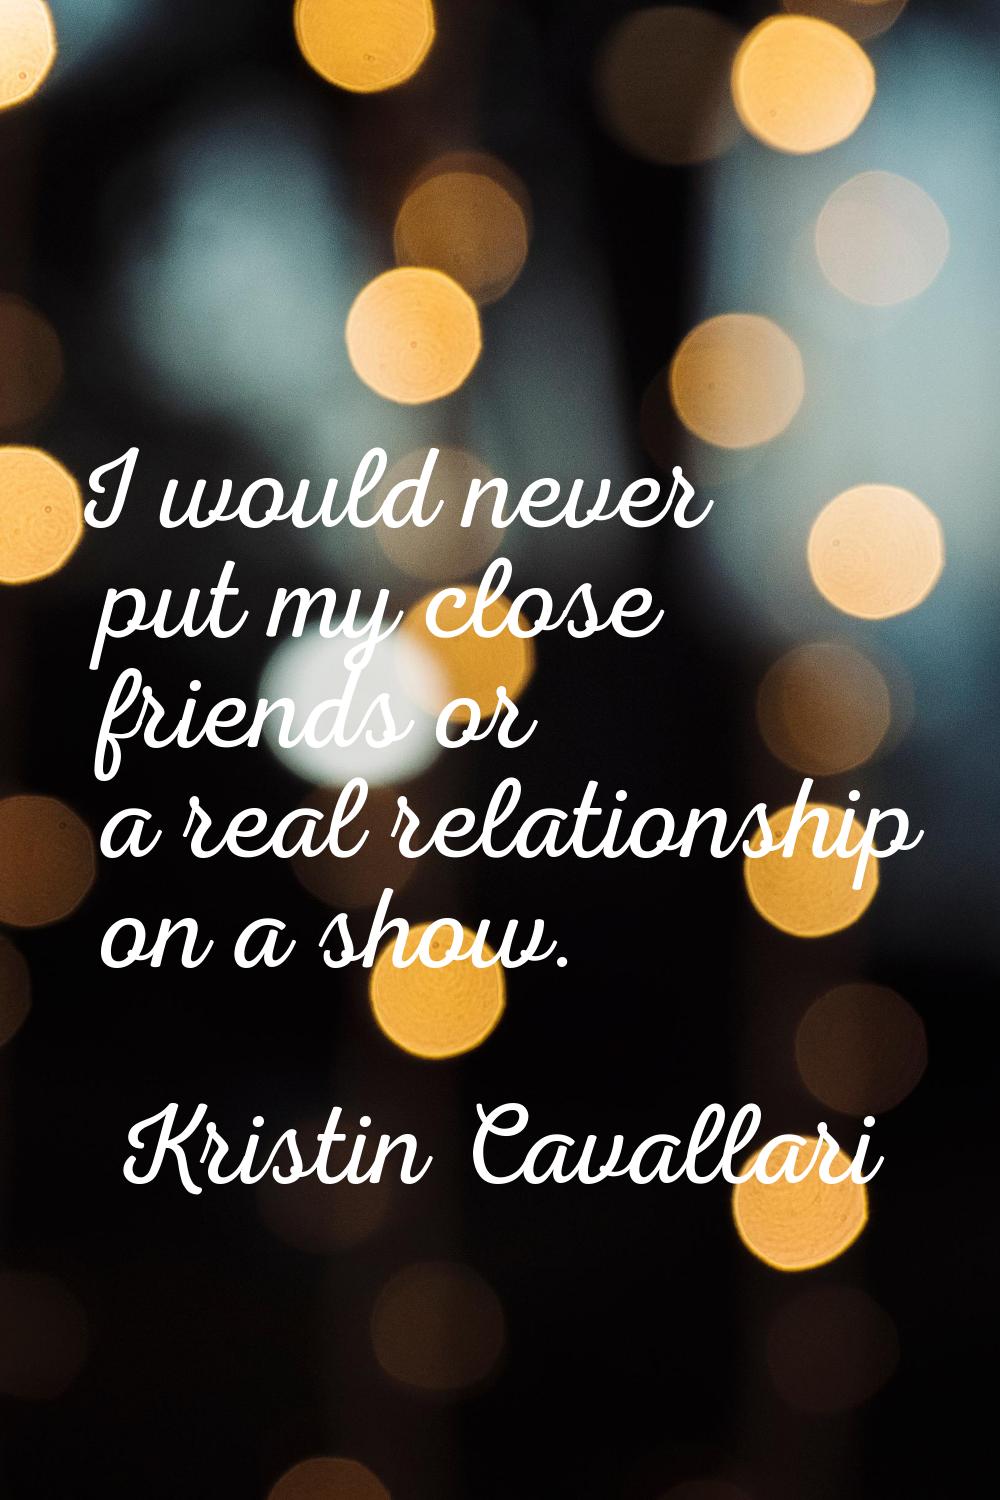 I would never put my close friends or a real relationship on a show.